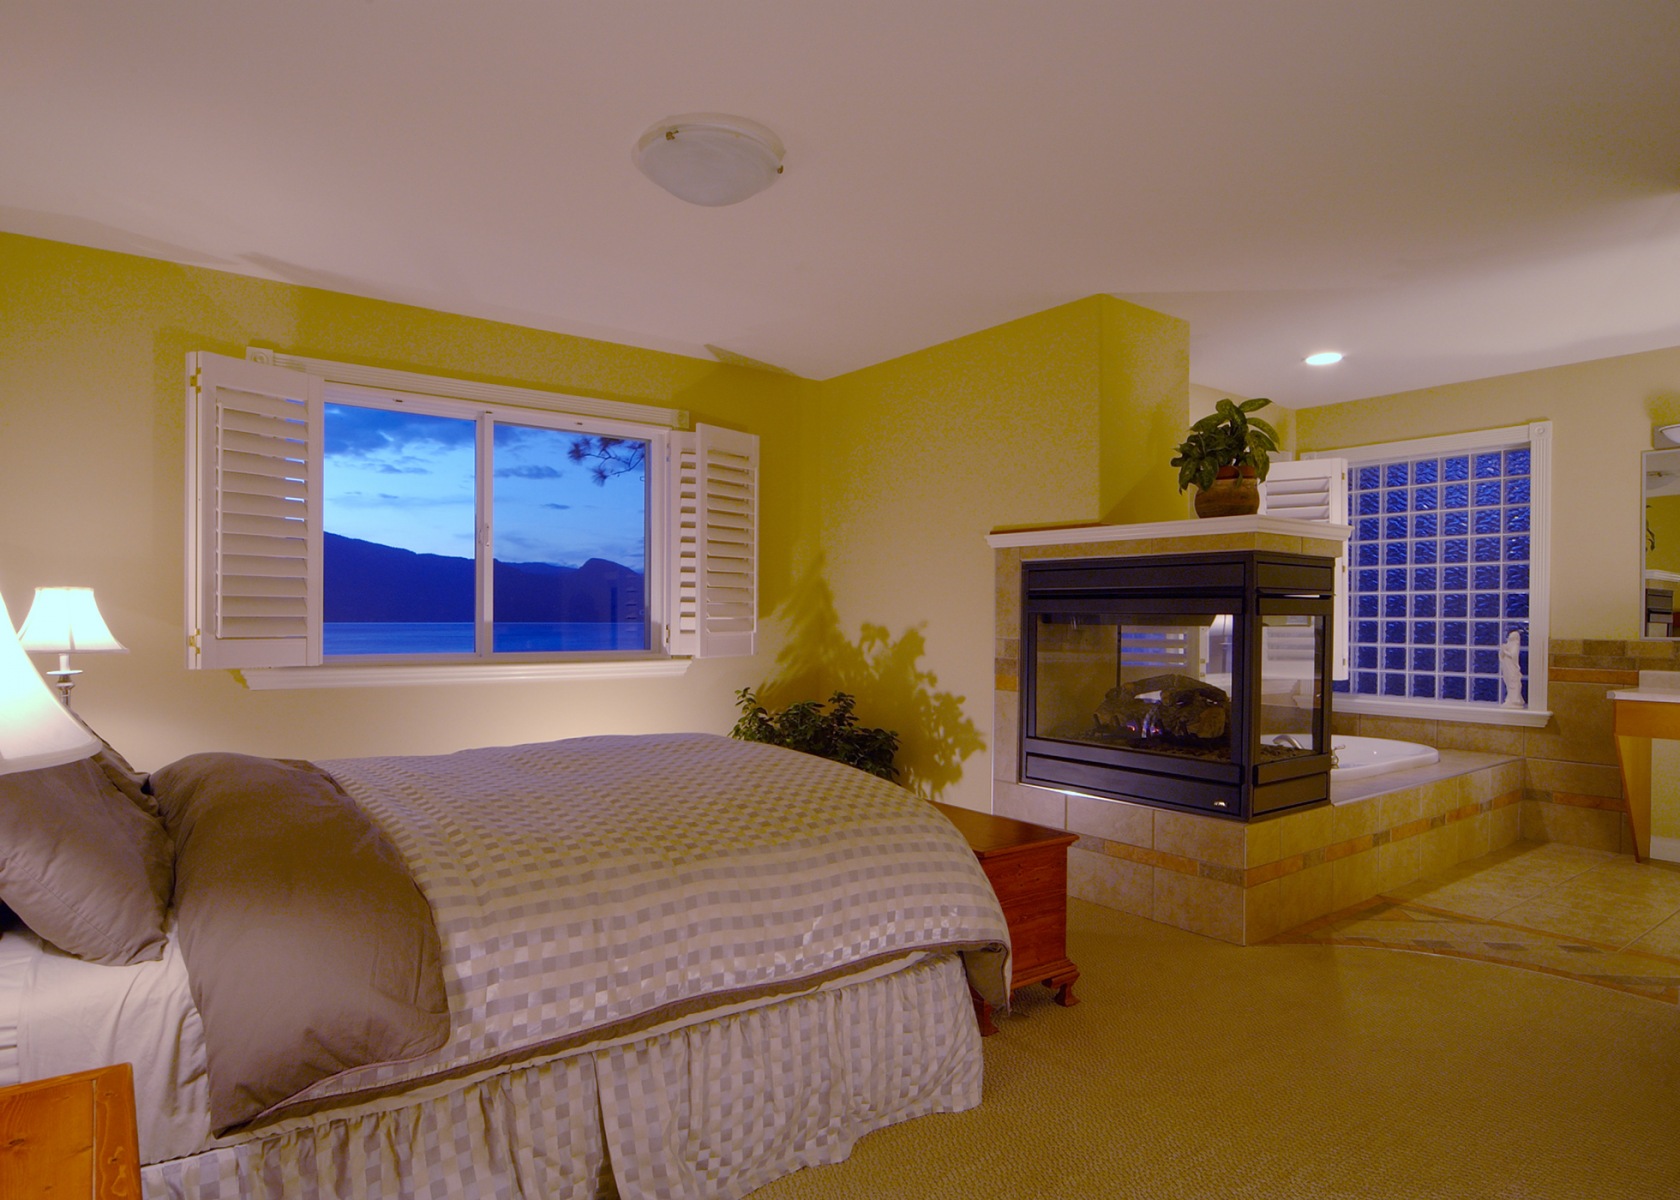 1_harmony_homes_carrs_landing_road_residence_bed_room_night_gallery_image_2